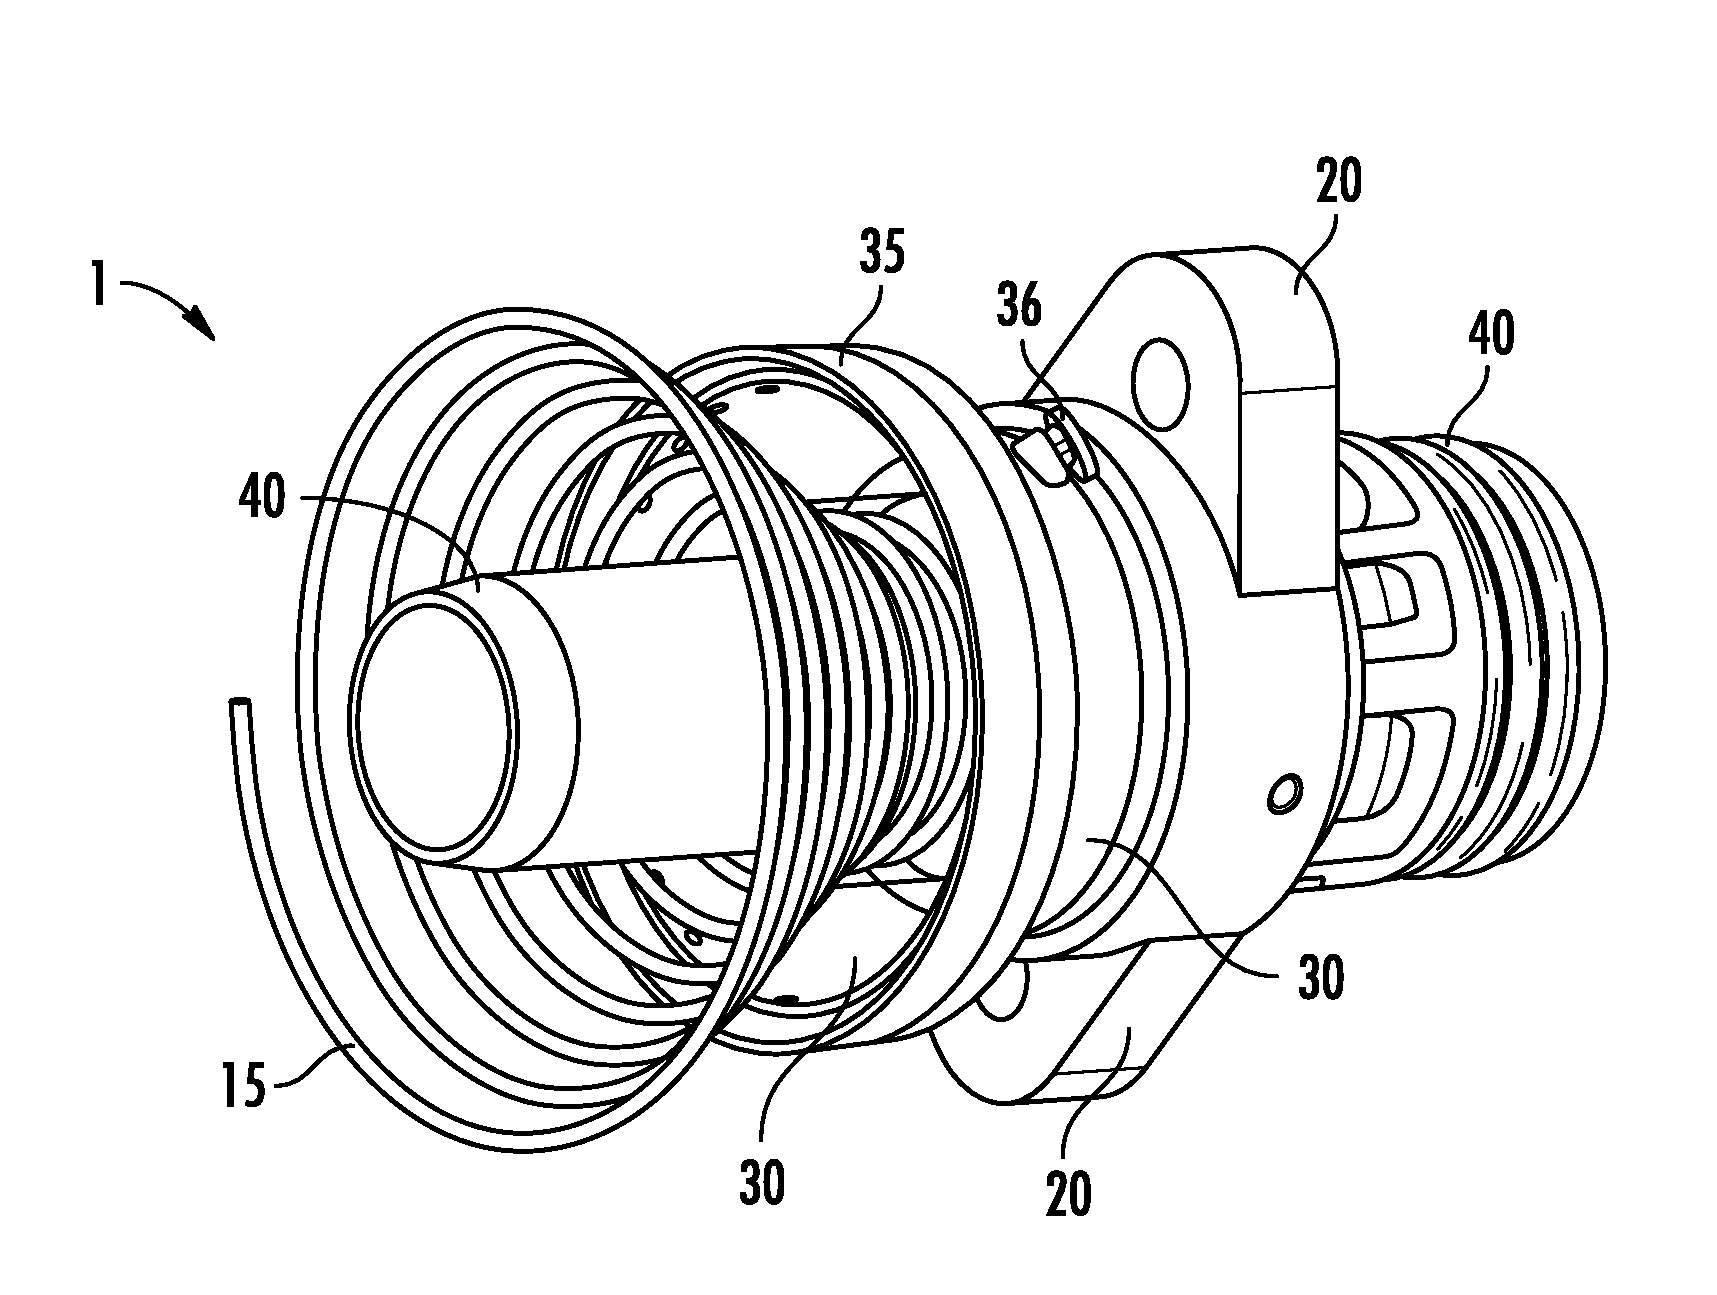 Systems for implanting and using a conduit within a tissue wall